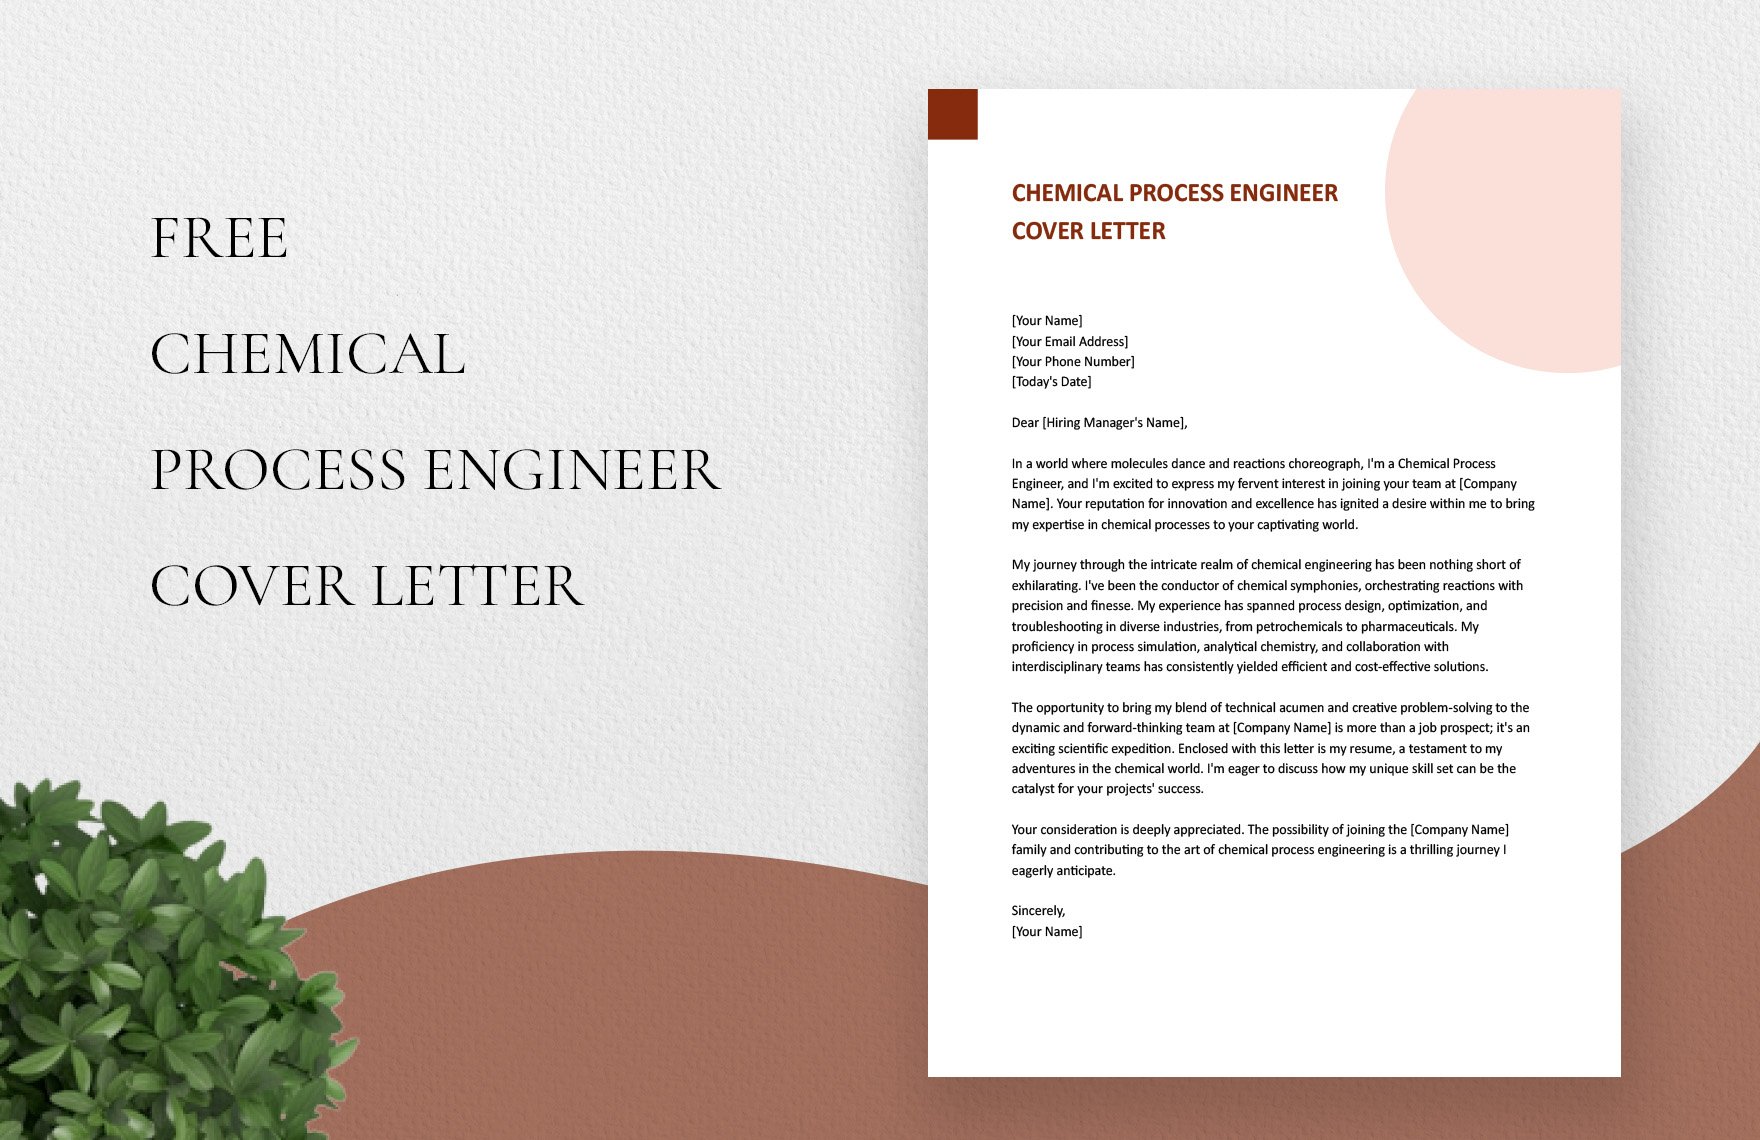 Chemical Process Engineer Cover Letter in Word, Google Docs